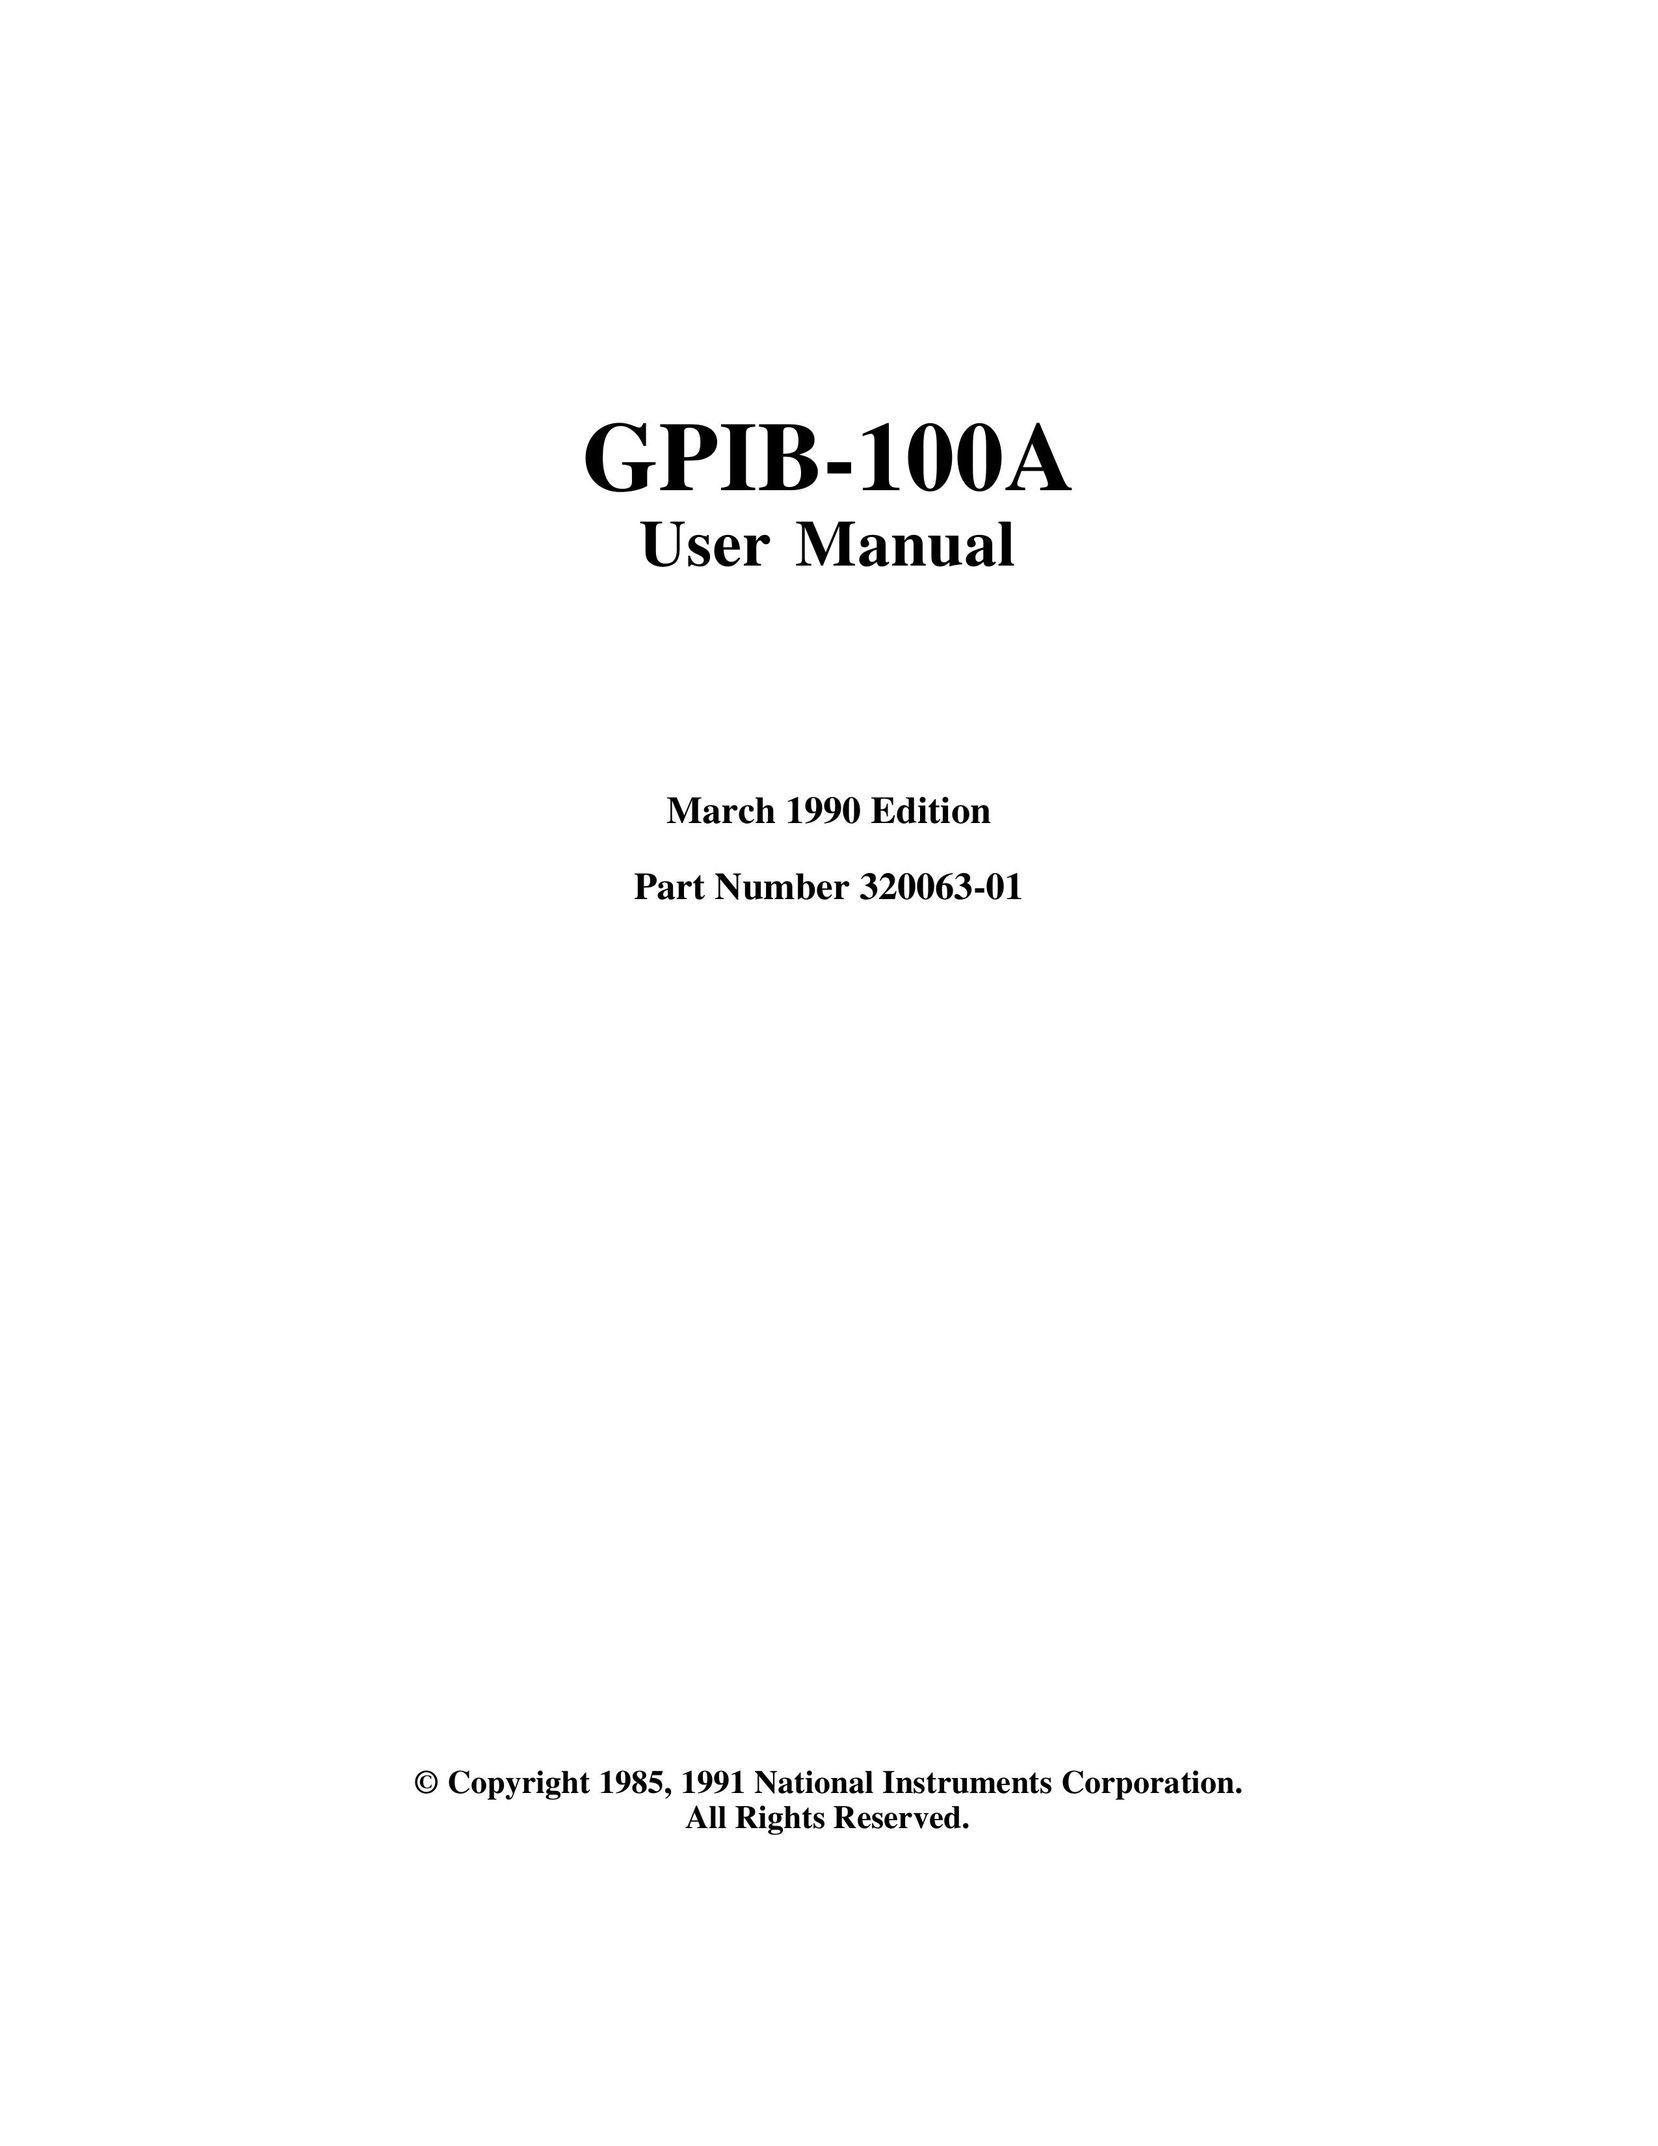 National Instruments GPIB-100A Switch User Manual